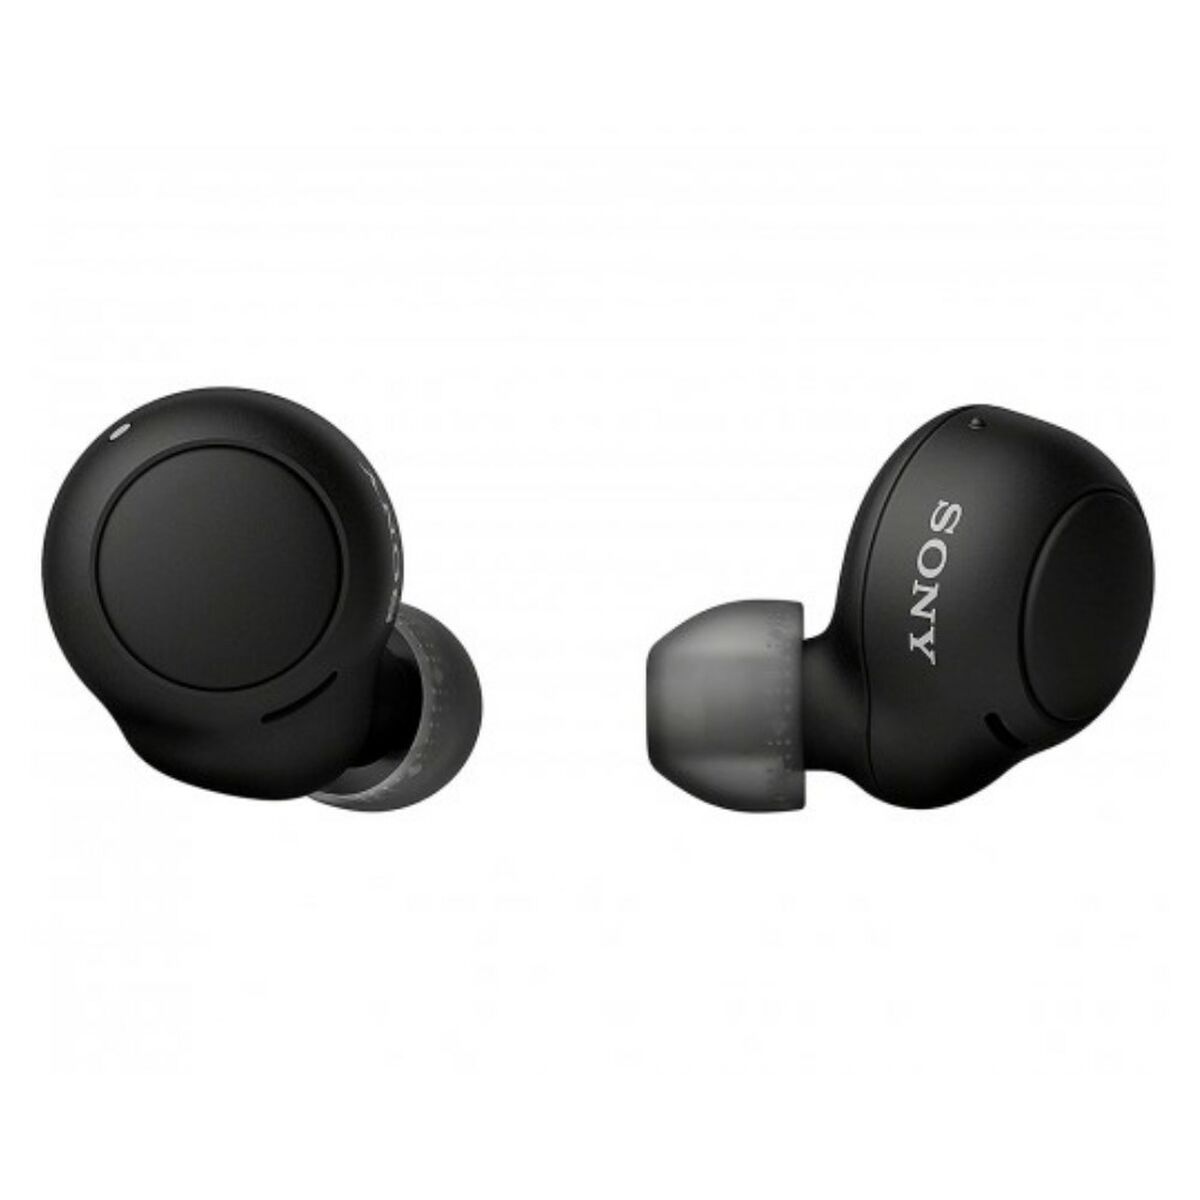 Headphones Sony WFC500B.CE7 Black, Sony, Electronics, Mobile communication and accessories, headphones-sony-wfc500b-ce7-black, Brand_Sony, category-reference-2609, category-reference-2642, category-reference-2847, category-reference-t-19653, category-reference-t-21312, category-reference-t-4036, category-reference-t-4037, computers / peripherals, Condition_NEW, entertainment, gadget, music, office, Price_50 - 100, telephones & tablets, Teleworking, RiotNook